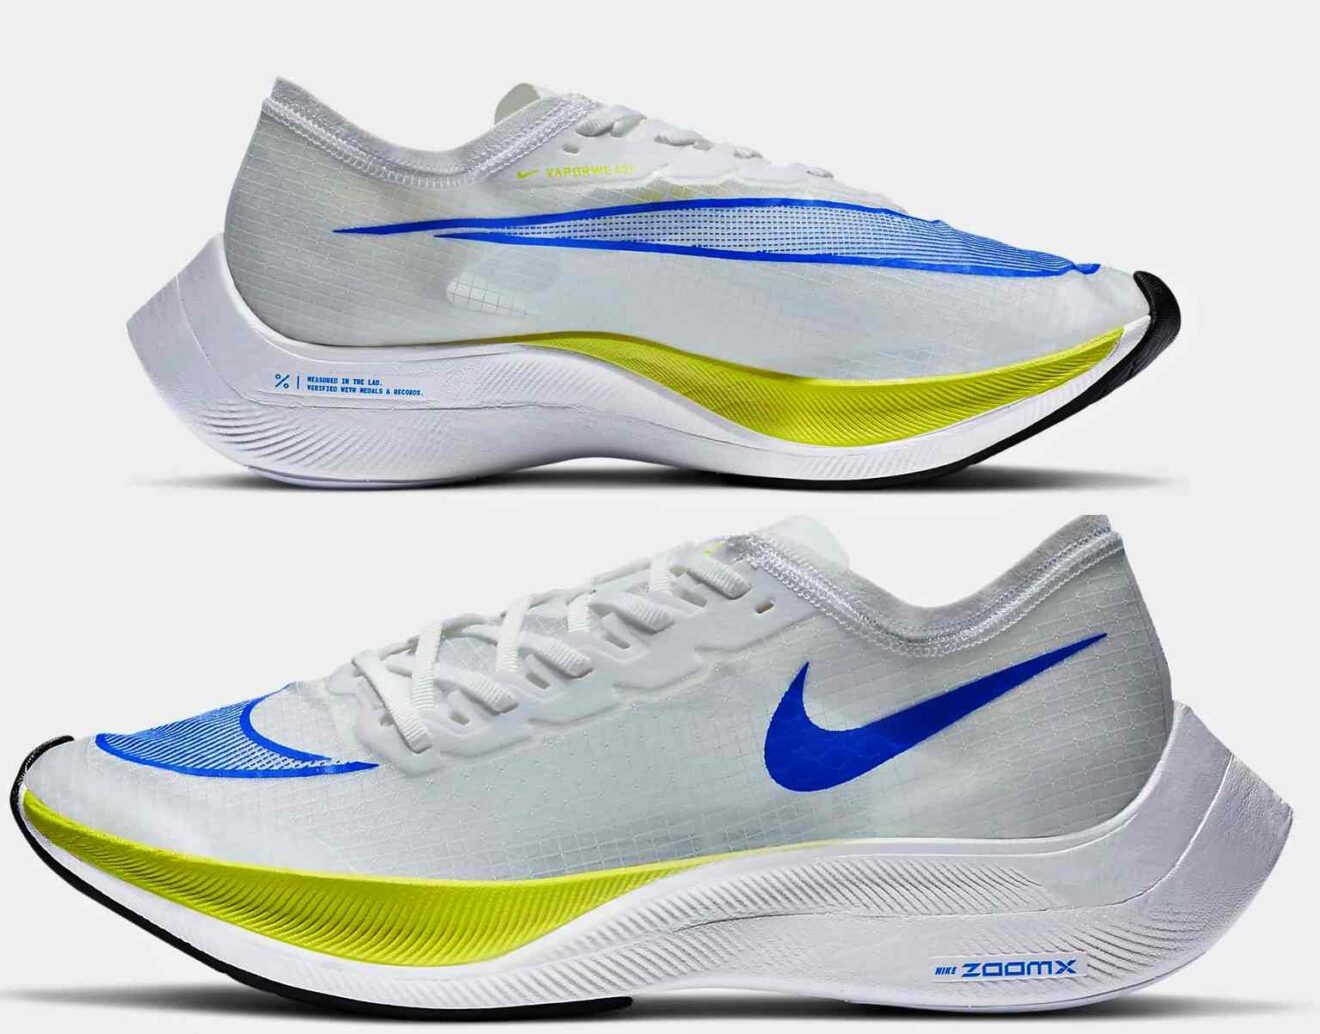 Which Nike Marathon shoes are best for marathon? Latest Review!